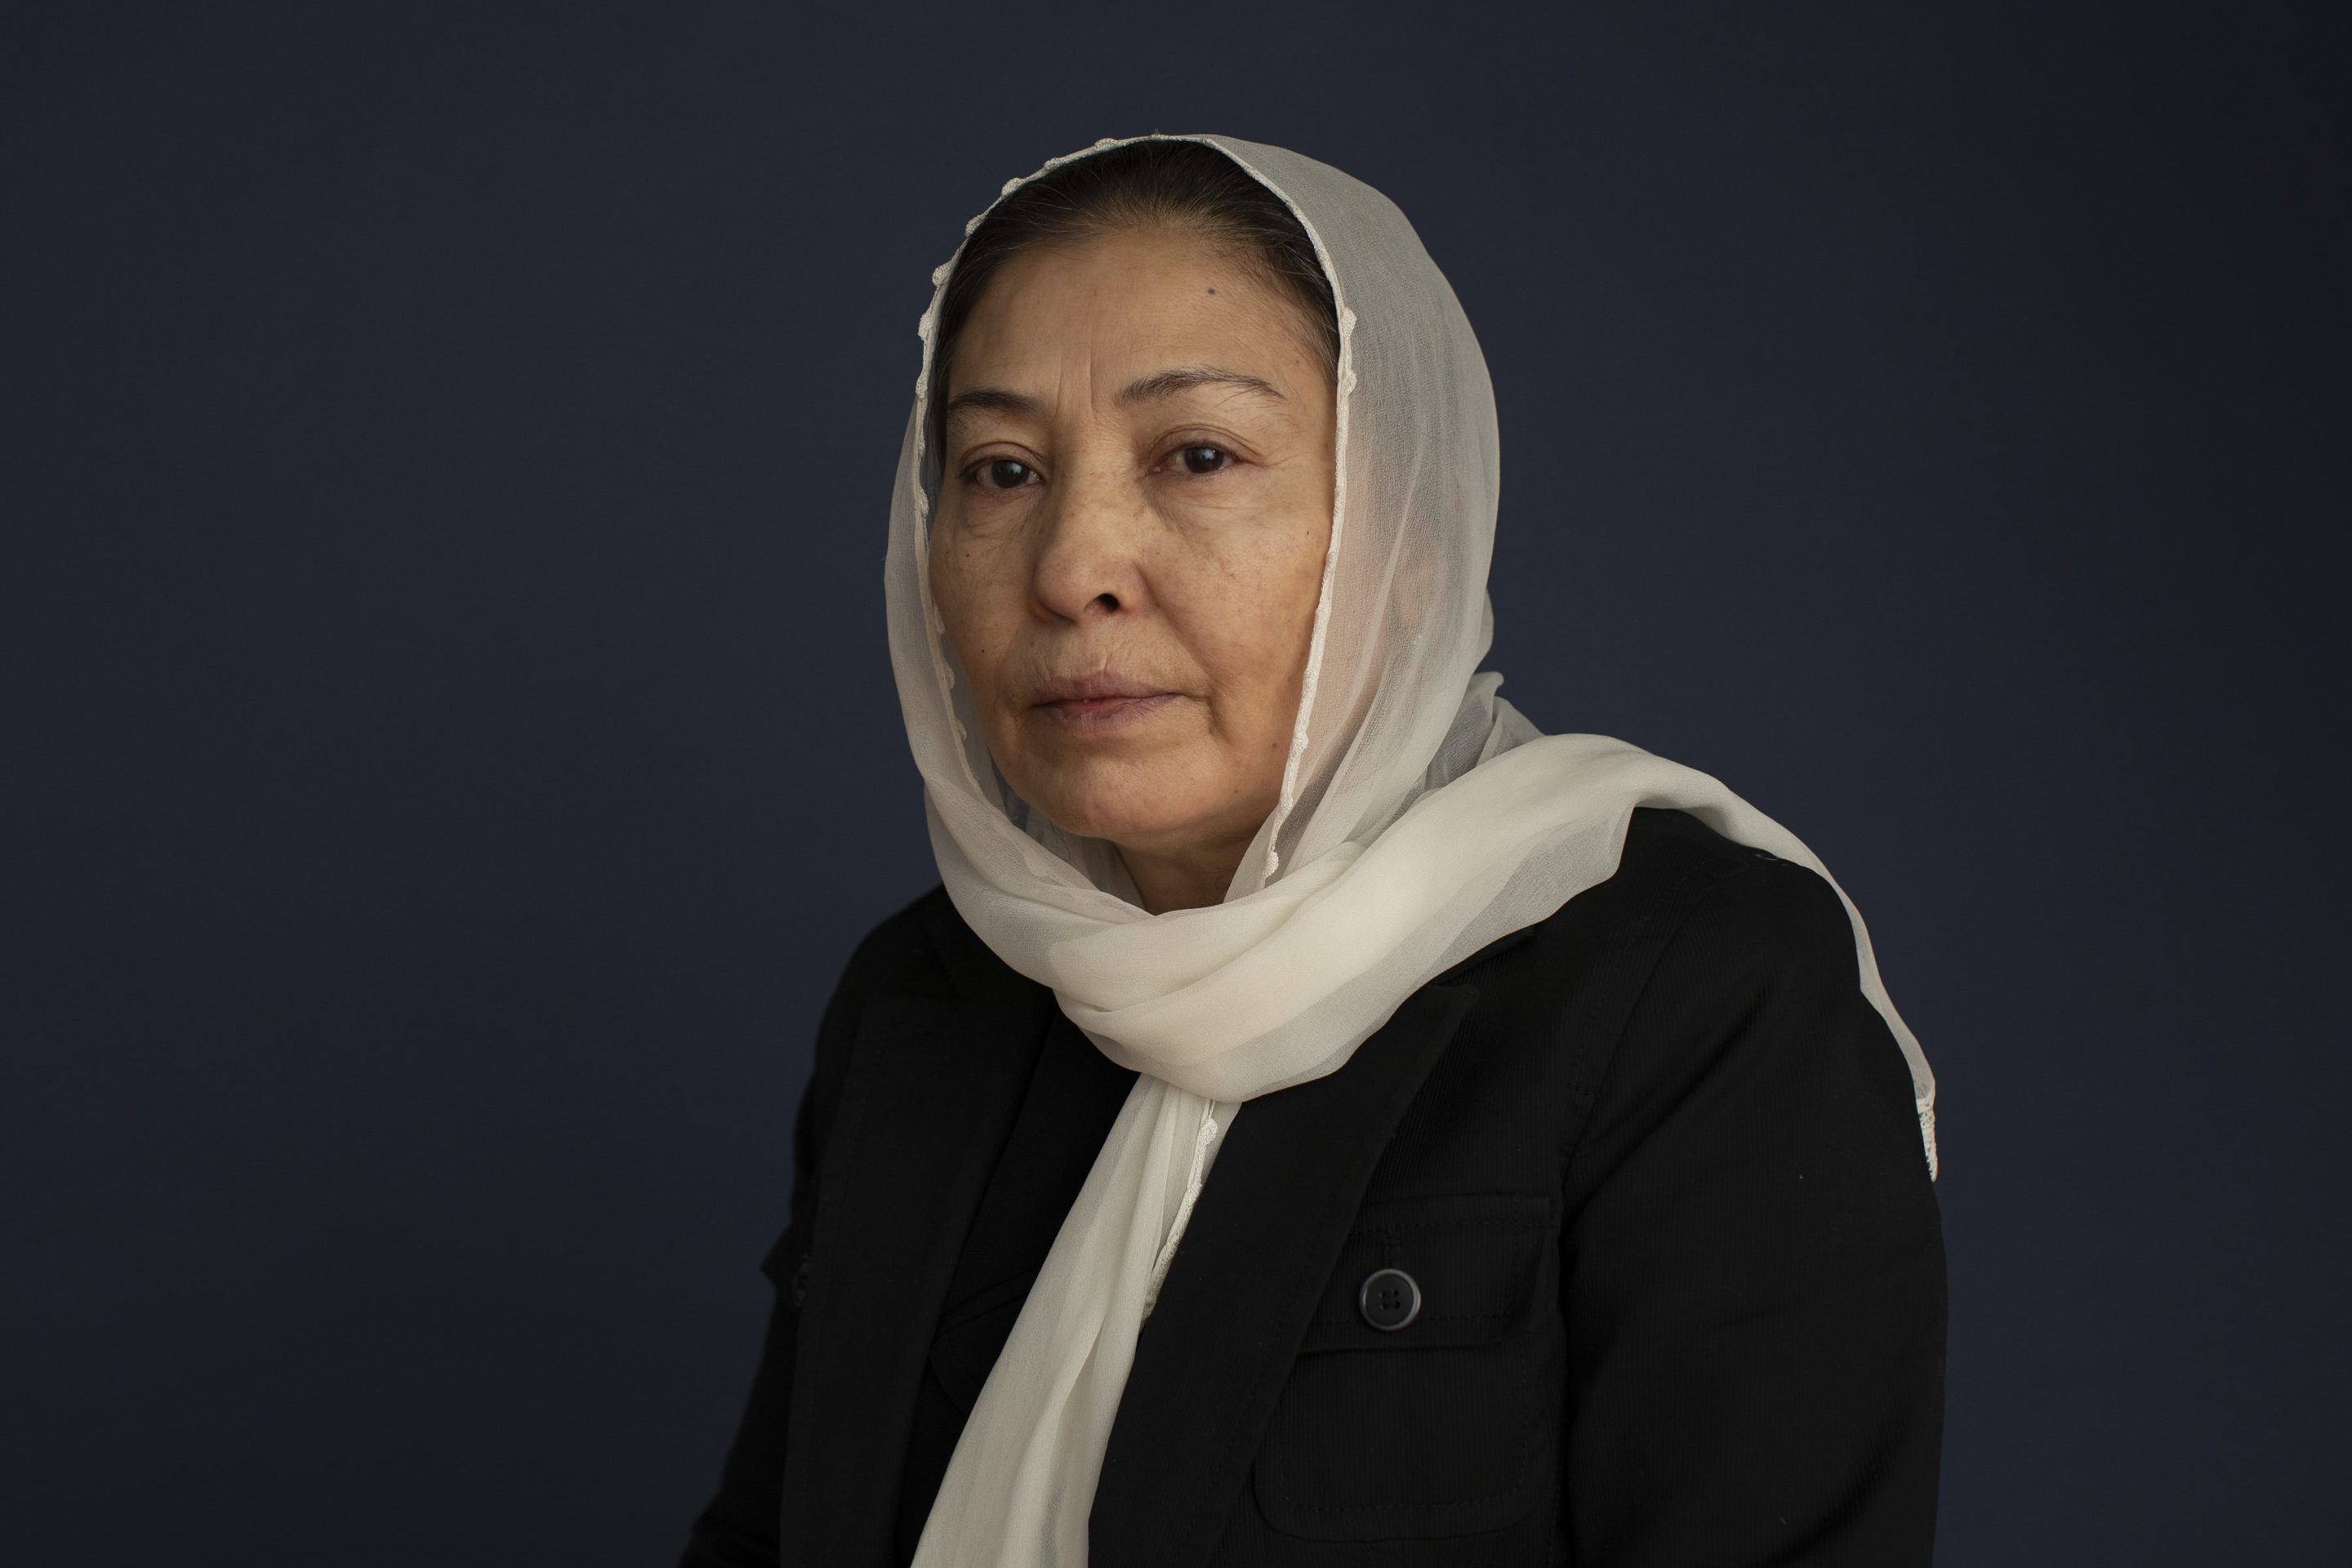 Nadira, a member of the Hazara ethnic group from Afghanistan, now living in Canada, is photographed  in Toronto  on Saturday February 29, 2020.